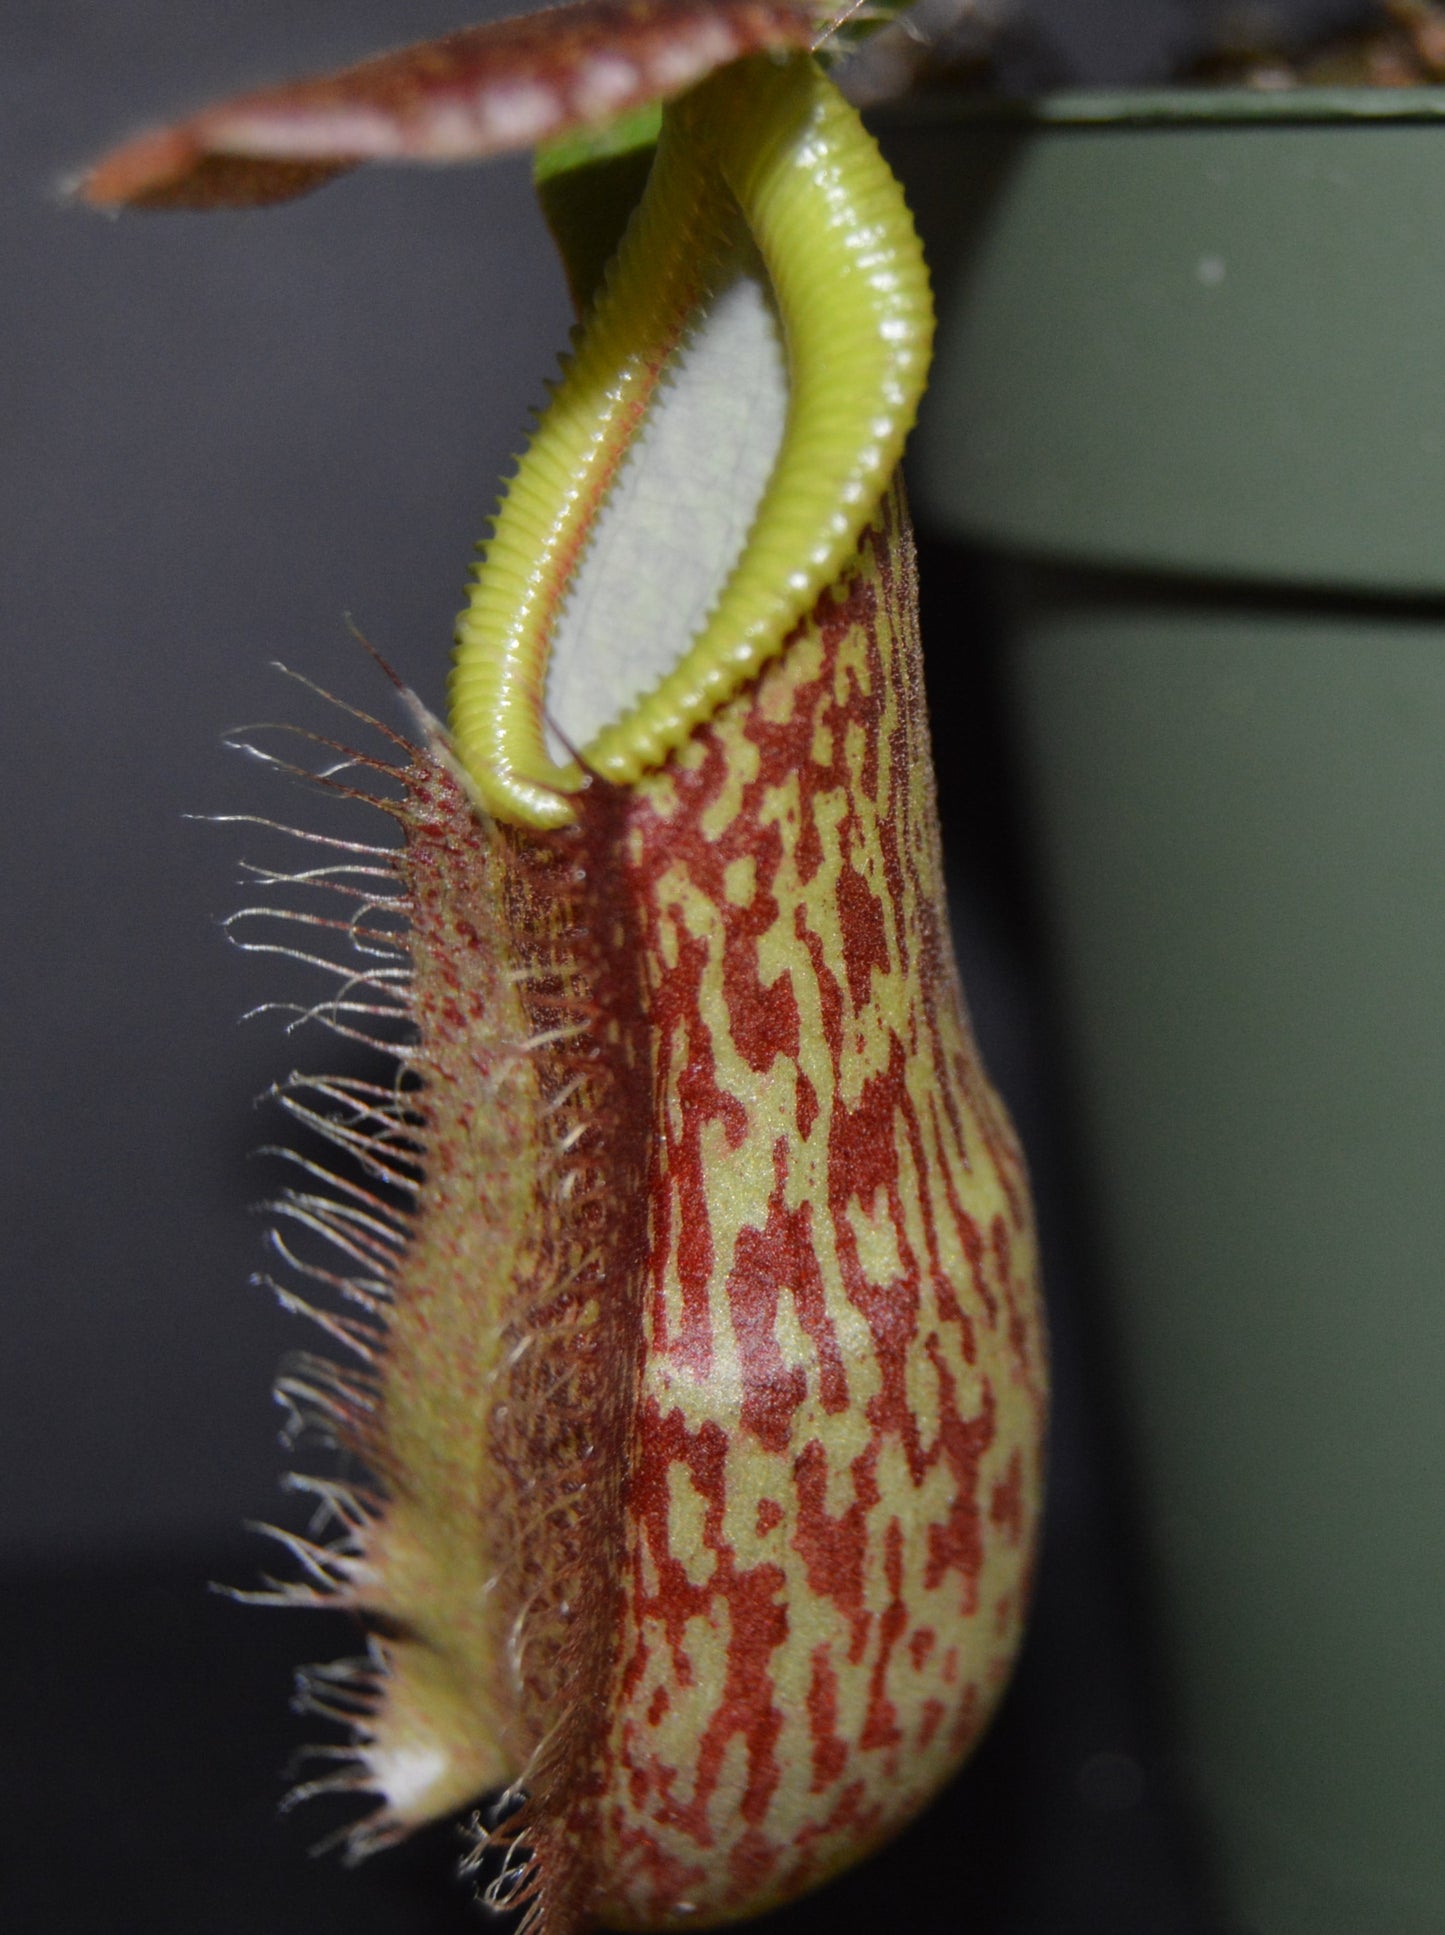 Amazing hybrid cross between N. Spathulata and Gng. Tambusisi form of hamata resemble the male parent side in coloration and teeth development. Pitchers will be large and lots of them as the hamata holds pitchers plants are in 4 inch pots